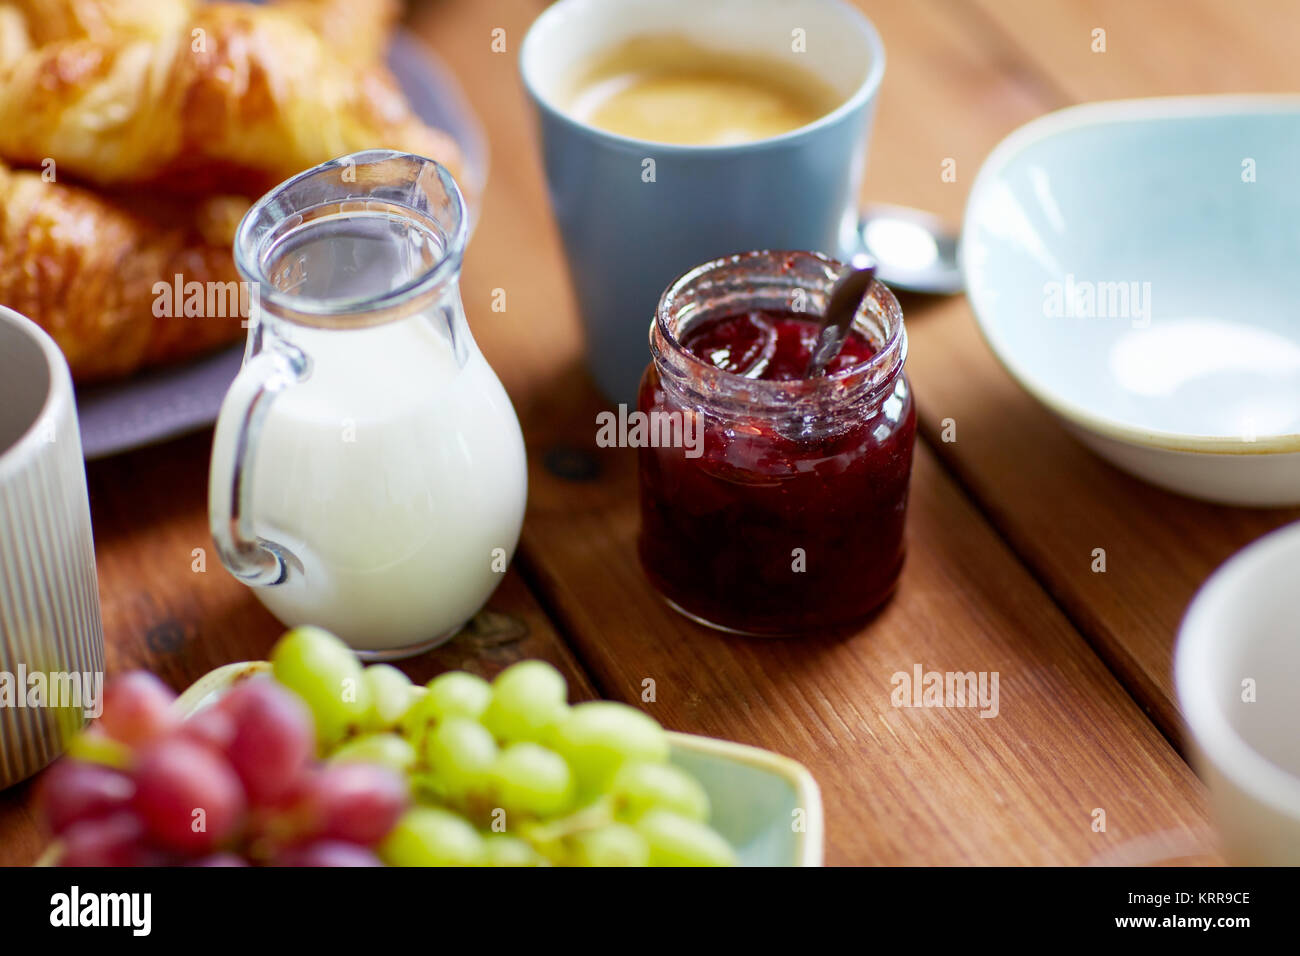 jar with jam on wooden table at breakfast Stock Photo